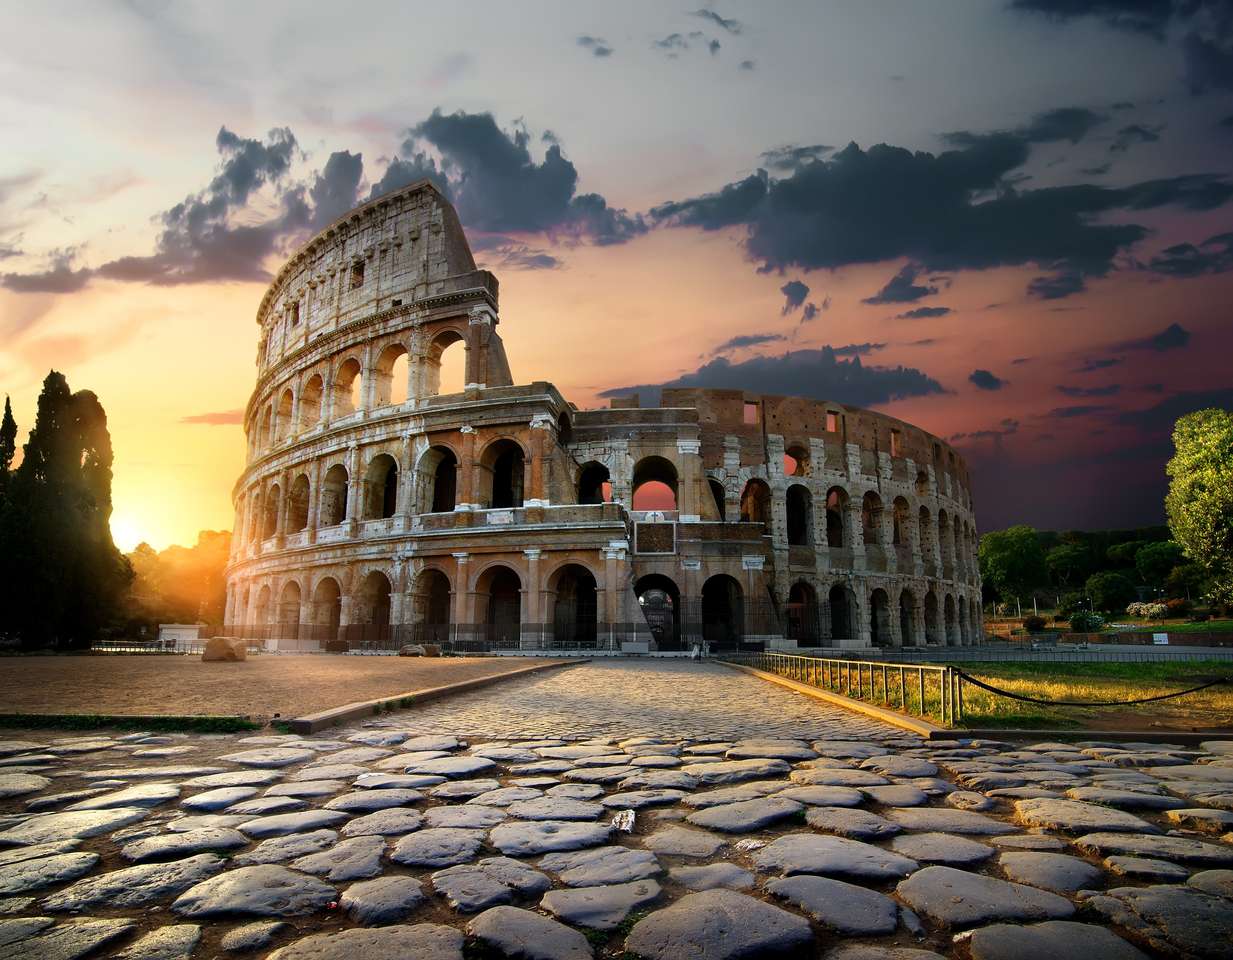 Sunlight on ancient ruins of Colosseum in Rome, Italy puzzle online from photo